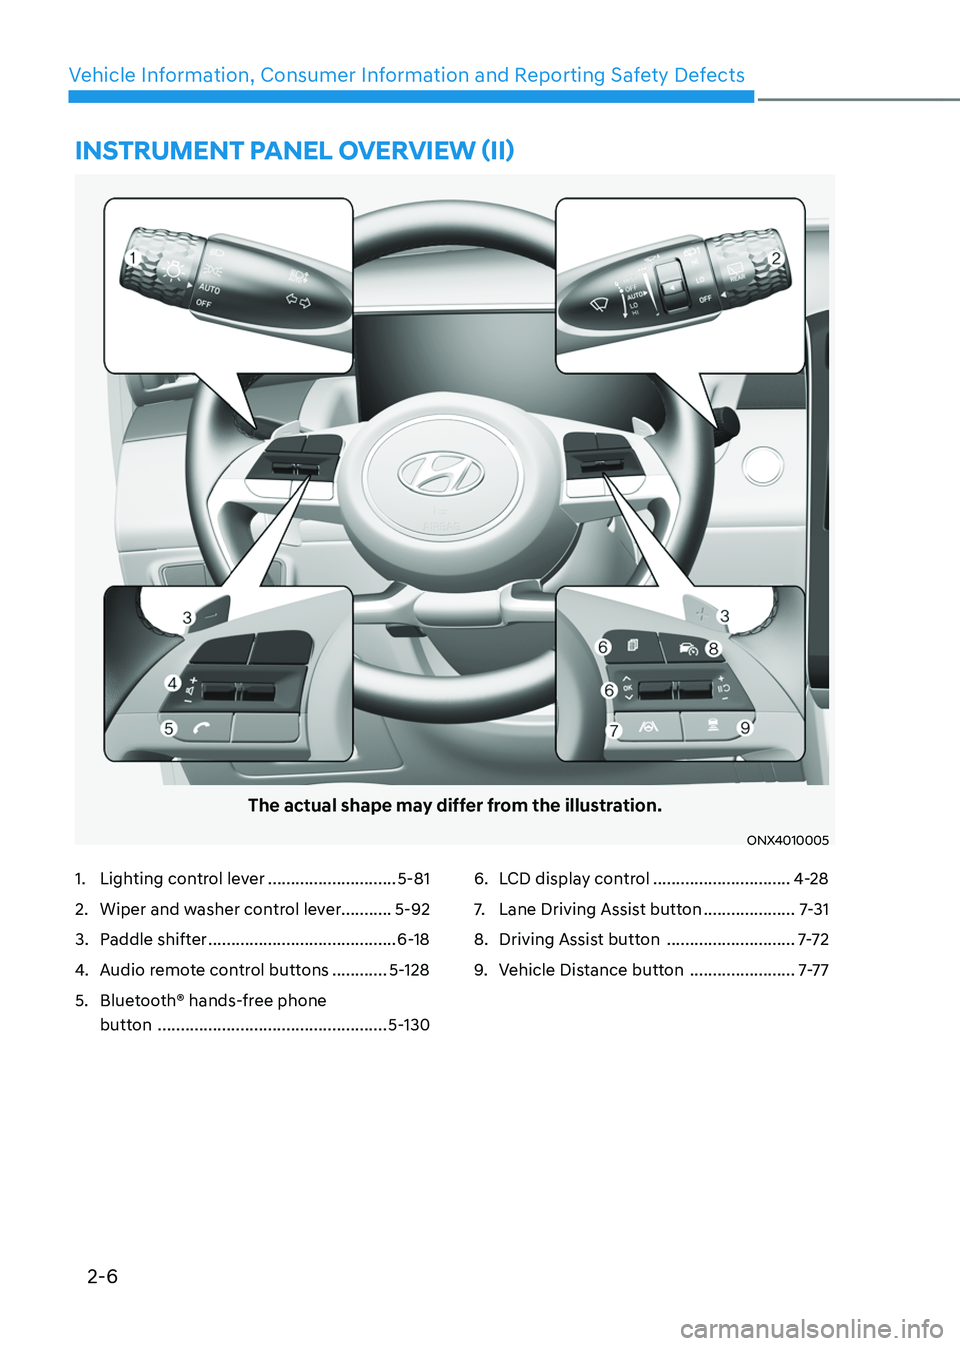 HYUNDAI TUCSON HYBRID 2021  Owners Manual 2-6
Vehicle Information, Consumer Information and Reporting Safety Defects
1. Lighting control lever ............................5-81
2. Wiper and washer control lever...........5-92
3. Paddle shifter